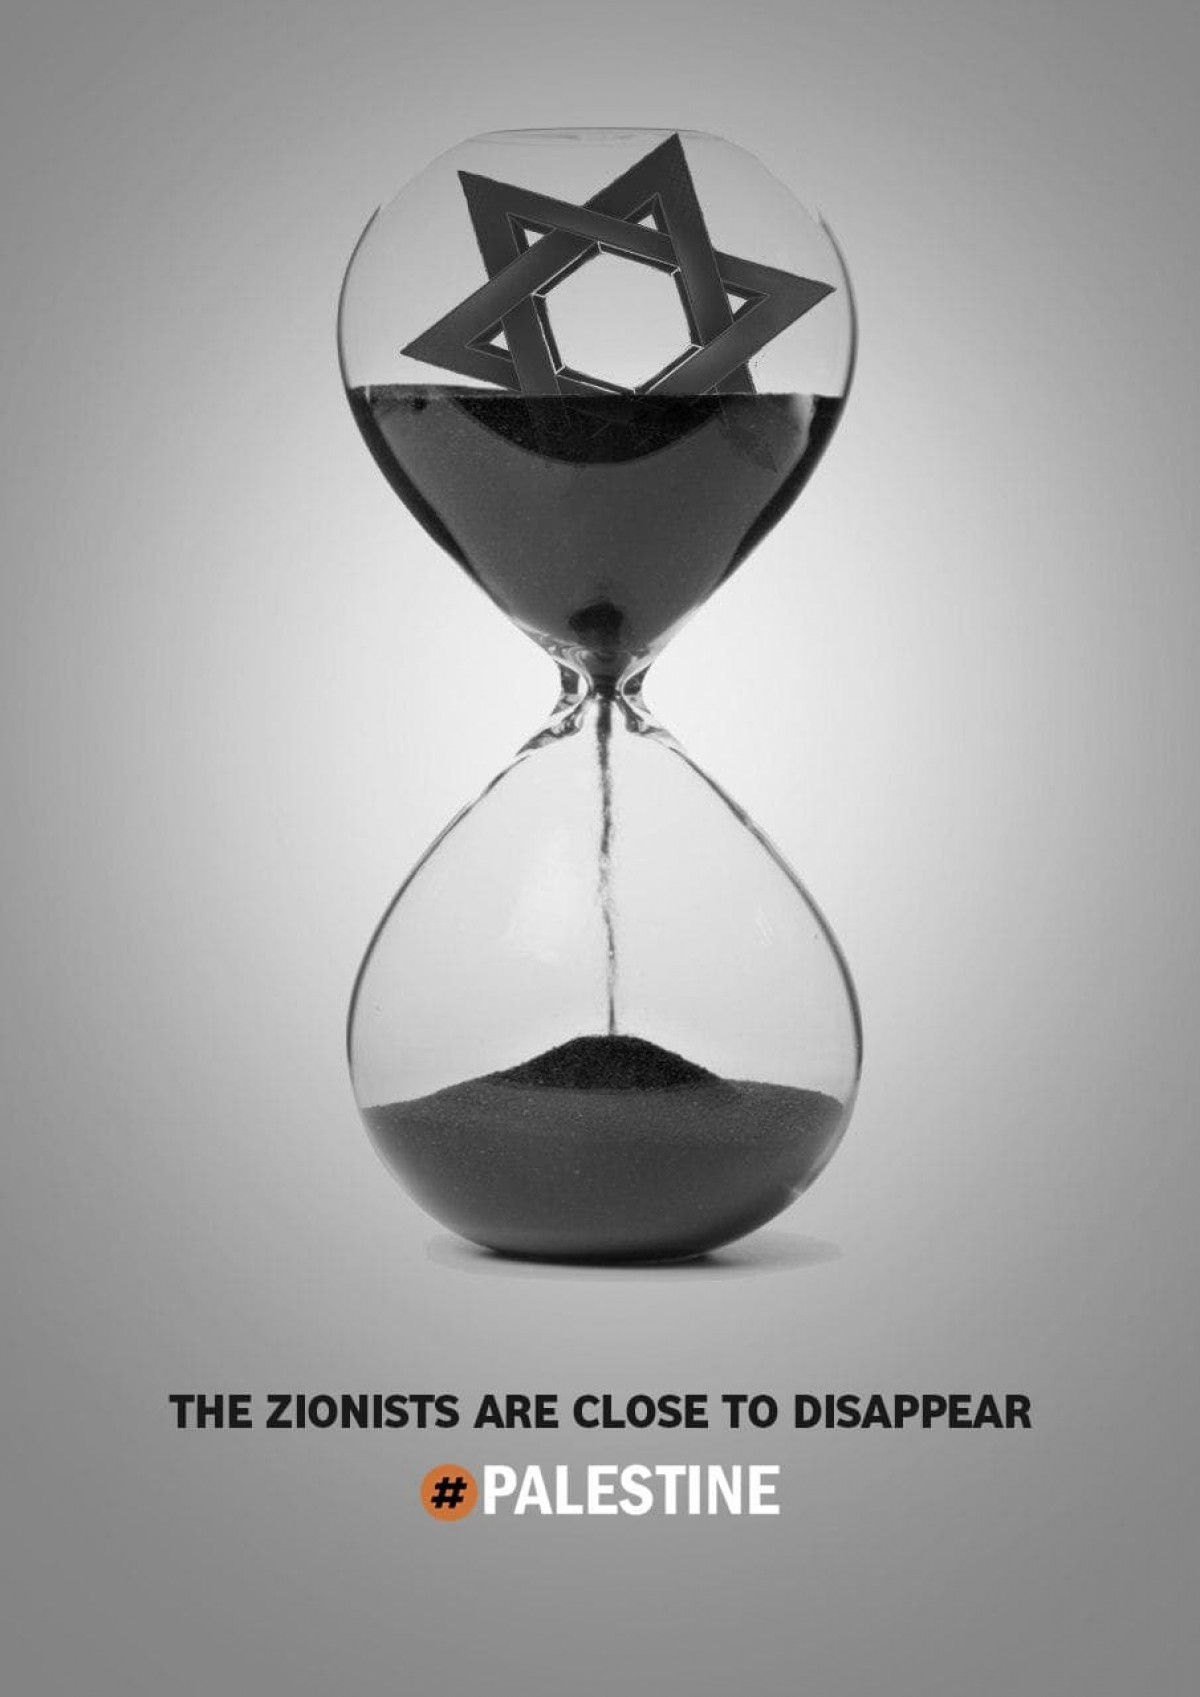 THE ZIONISTS ARE CLOSE TO DISAPPEAR